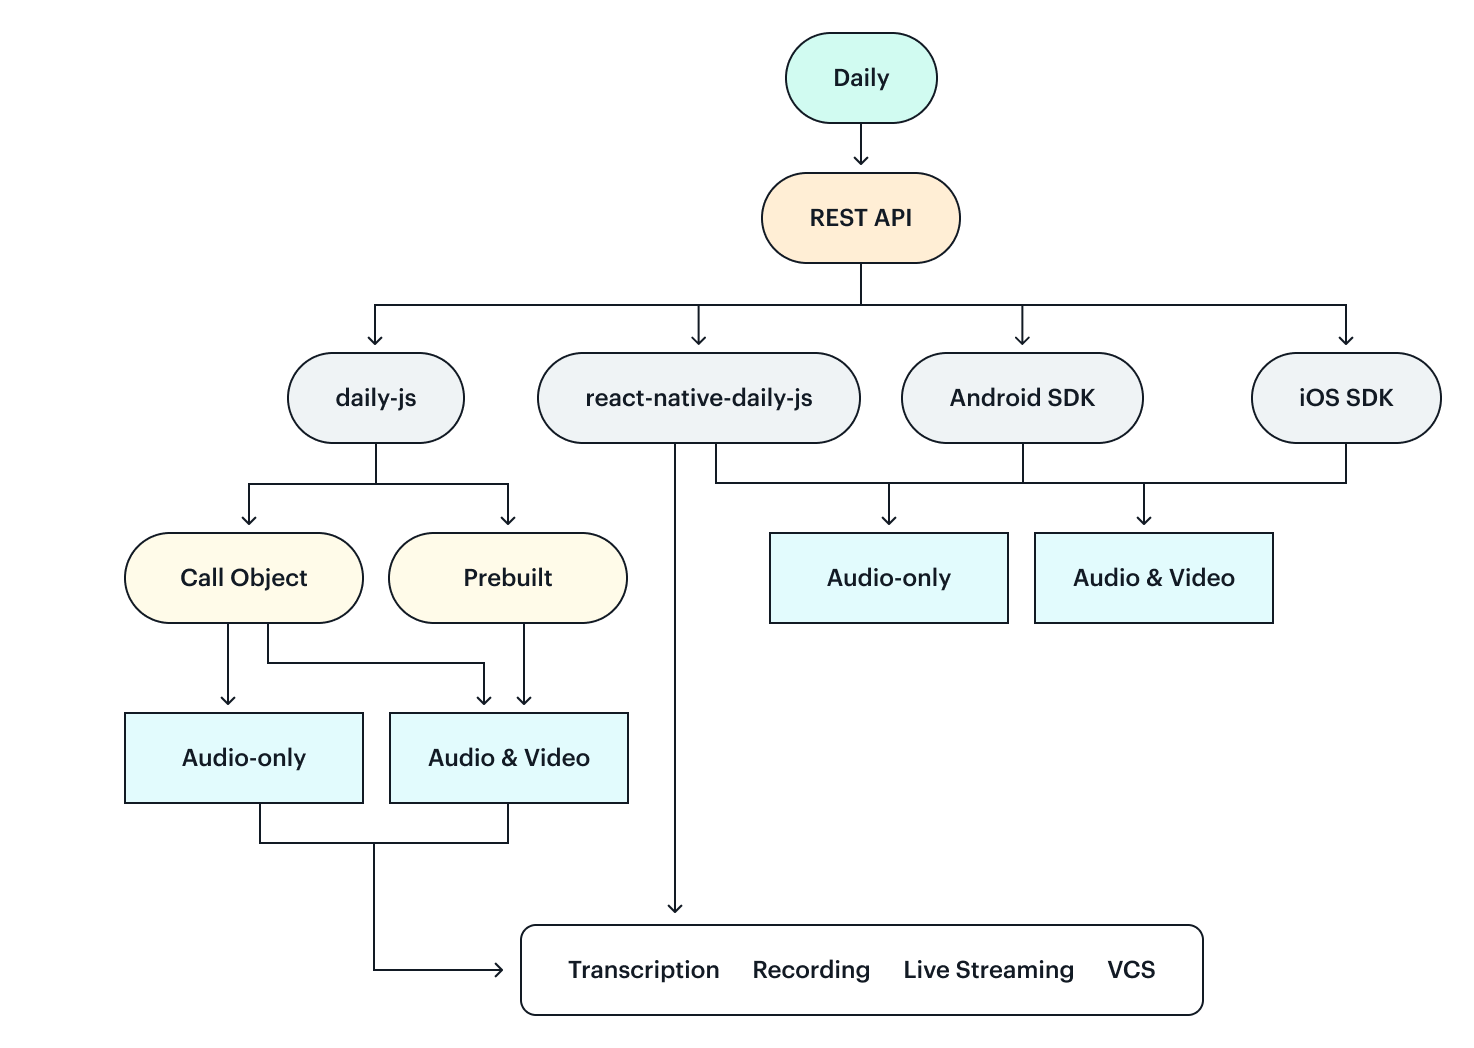 Flow chart of which features are available to the different Daily SDKs and libraries